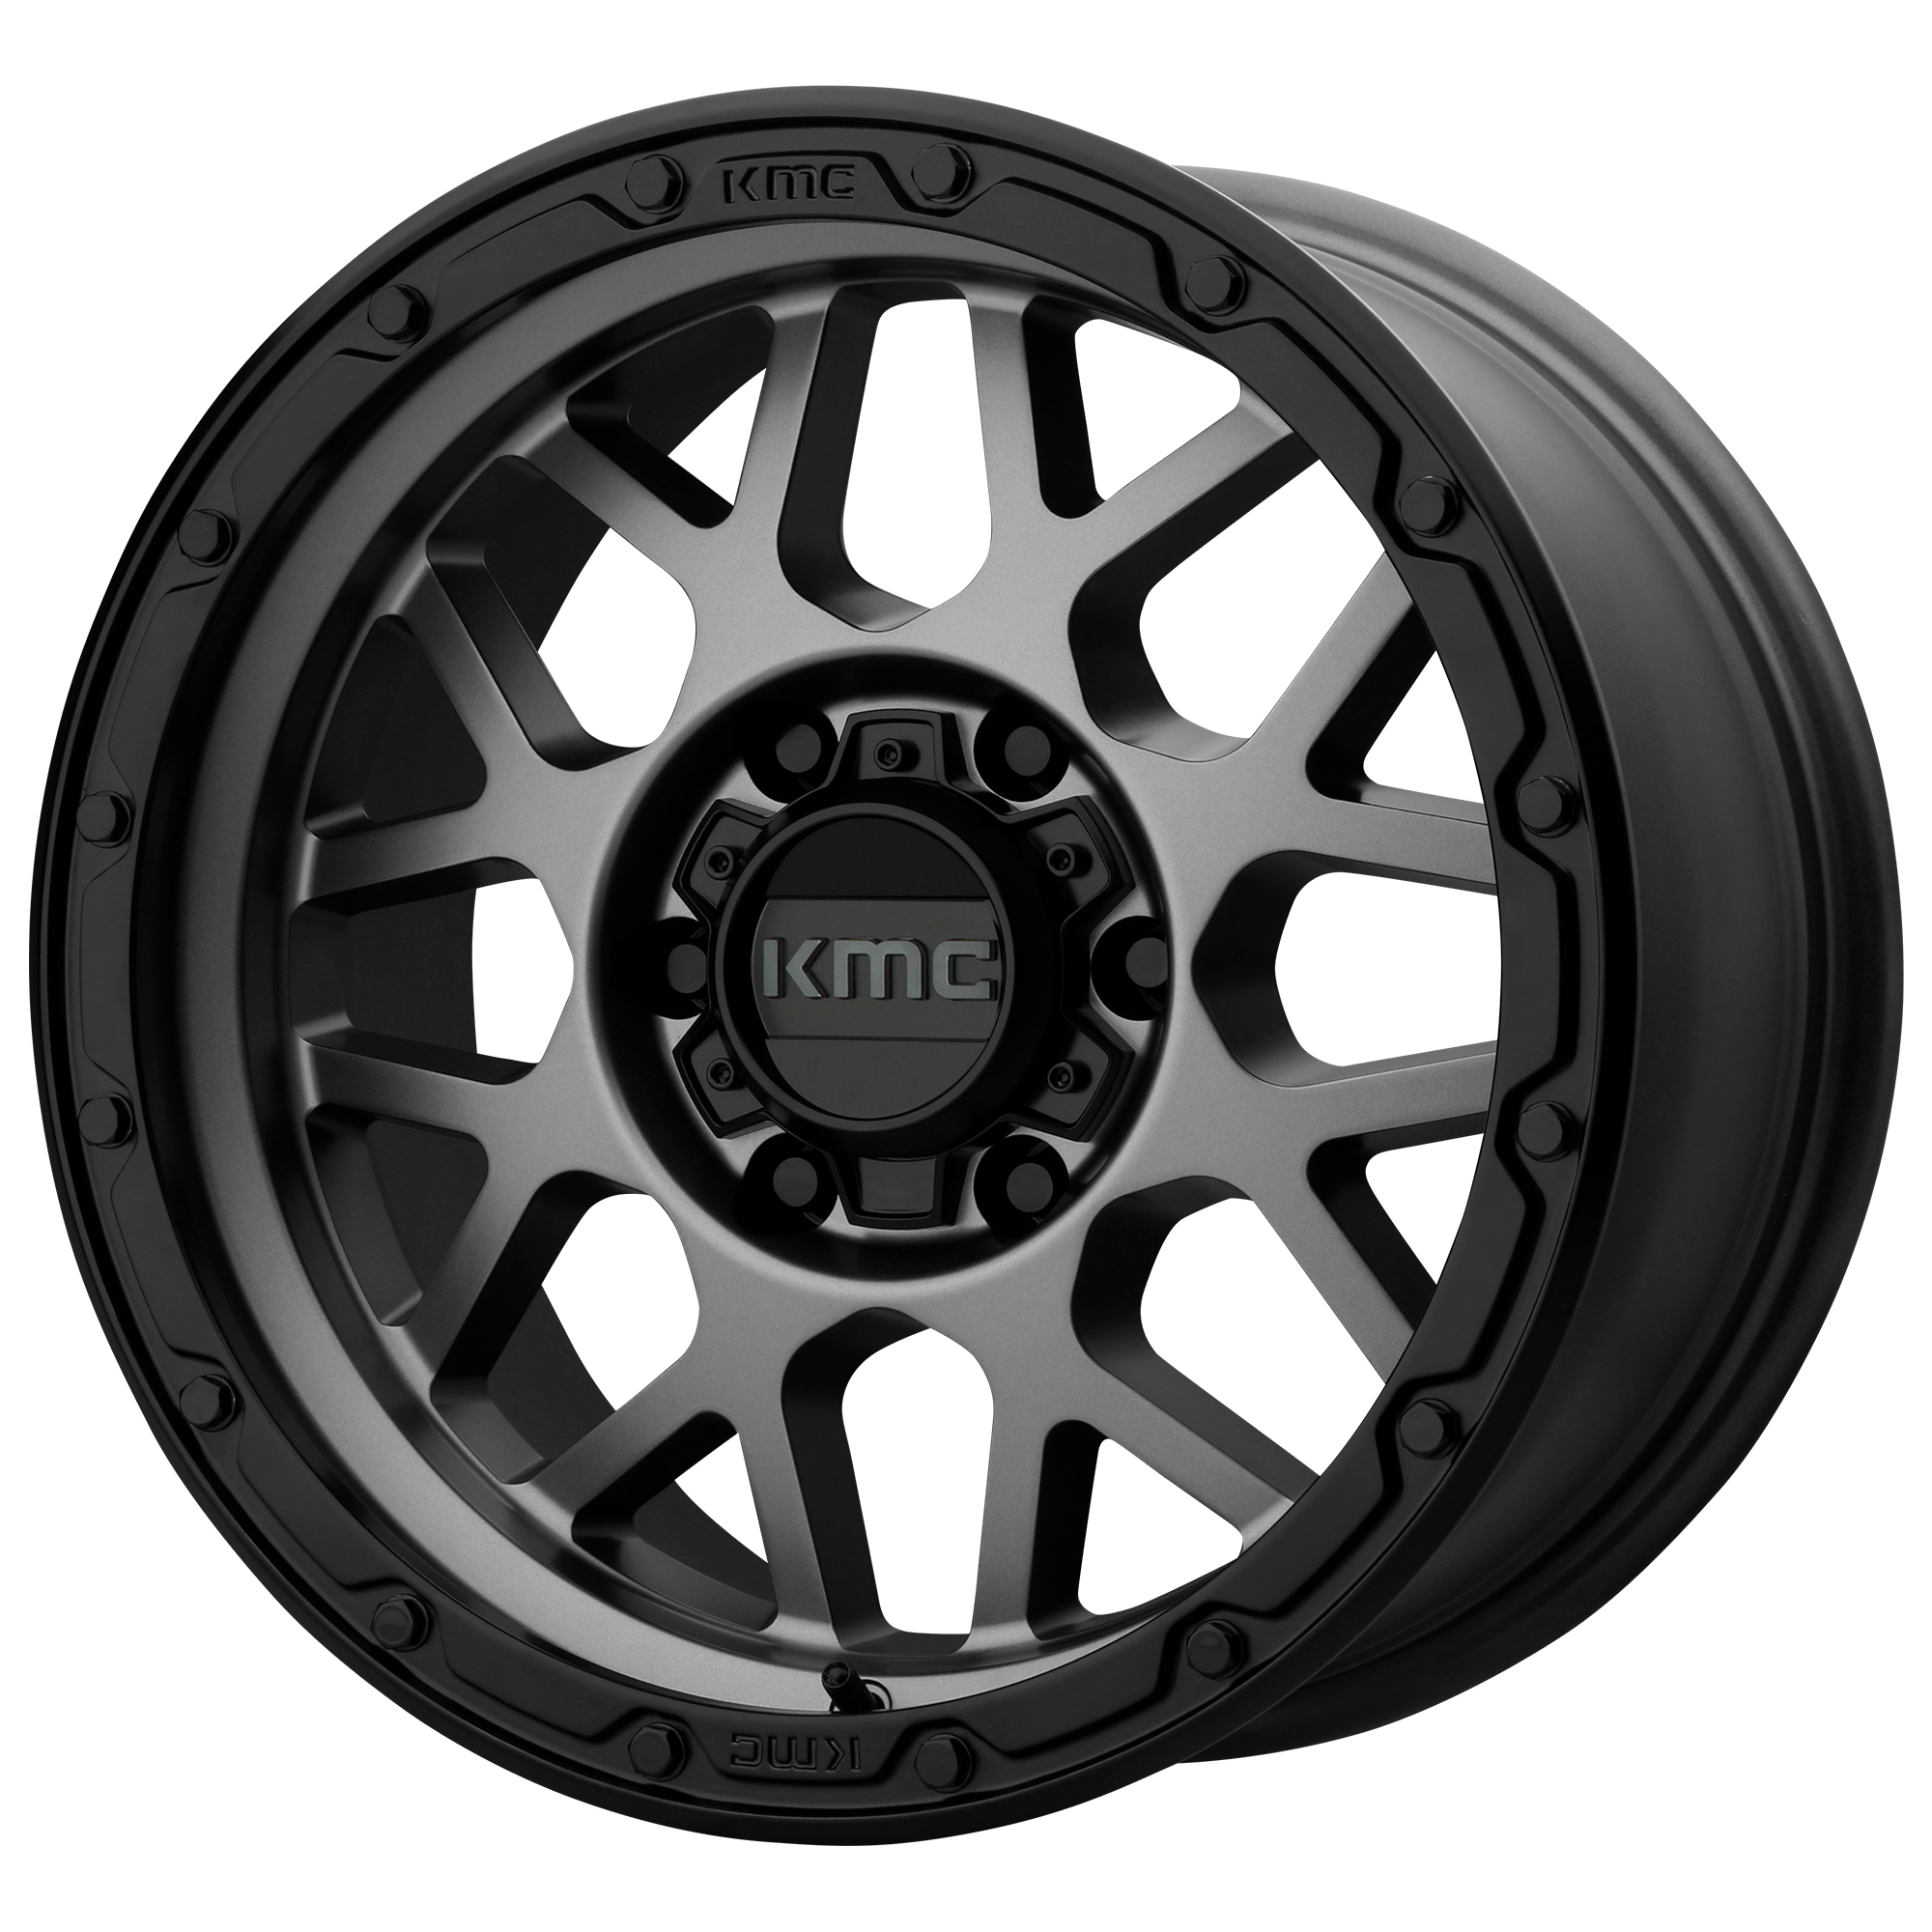 GRENADE OFF-ROAD 18x8.5 6x135.00 MATTE GRAY W/ MATTE BLACK LIP (0 mm) - Tires and Engine Performance